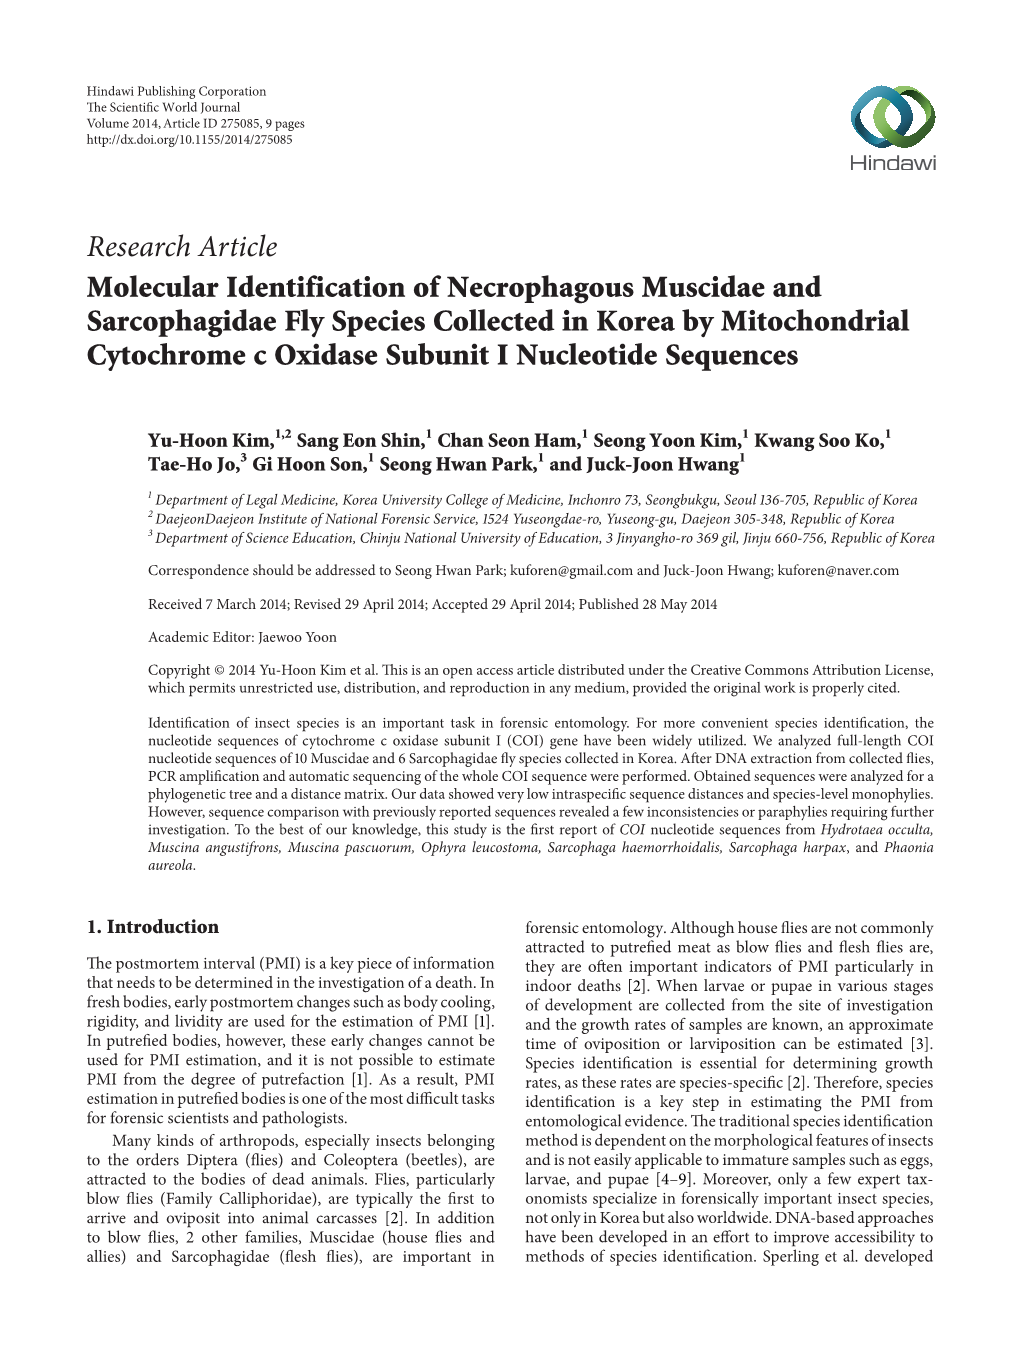 Molecular Identification of Necrophagous Muscidae and Sarcophagidae Fly Species Collected in Korea by Mitochondrial Cytochrome C Oxidase Subunit I Nucleotide Sequences